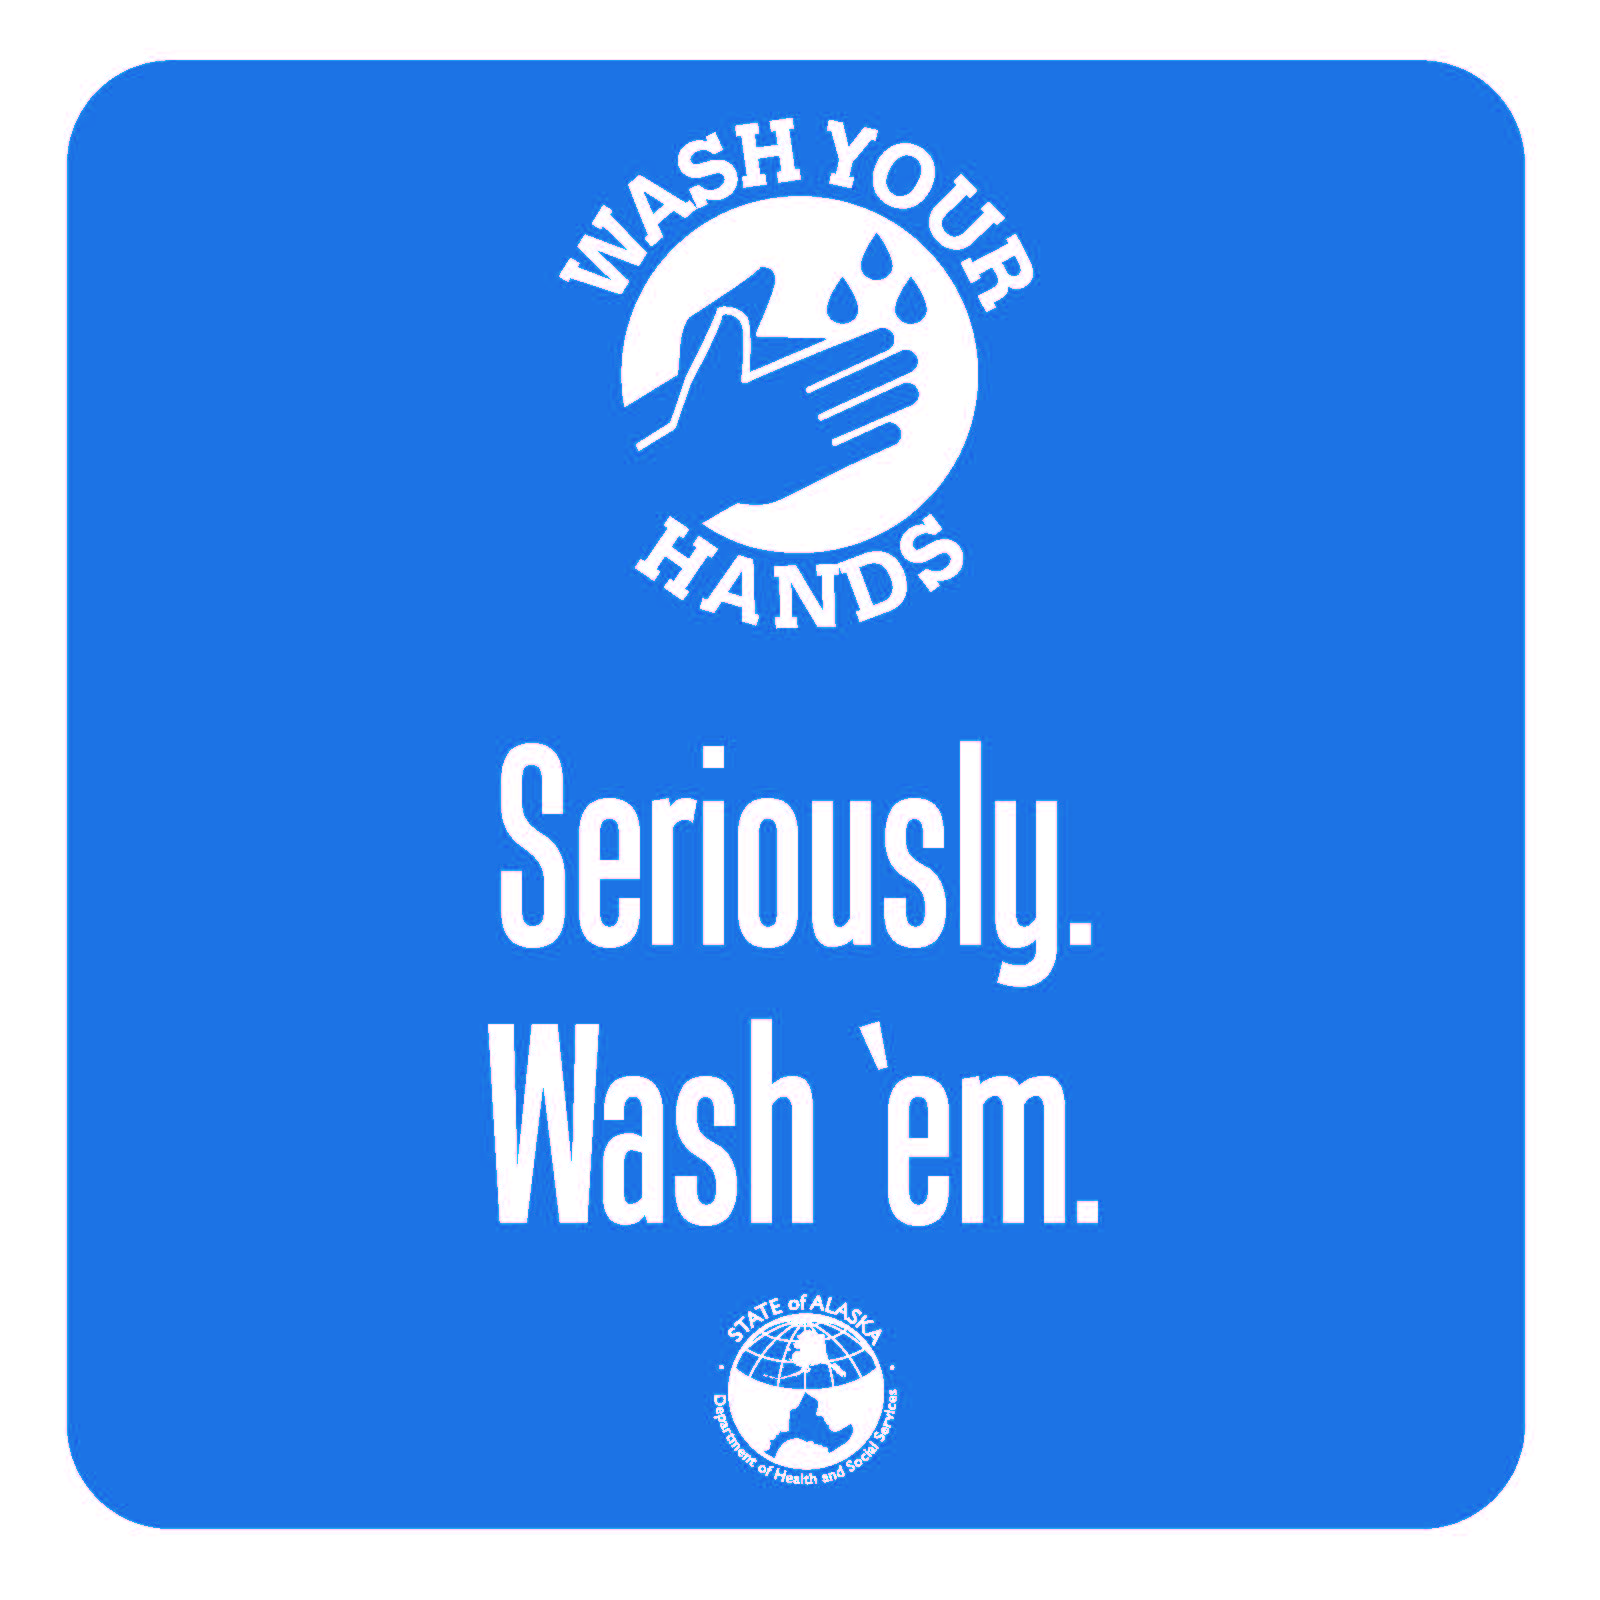 Wash your hands: Seriously. Wash them.